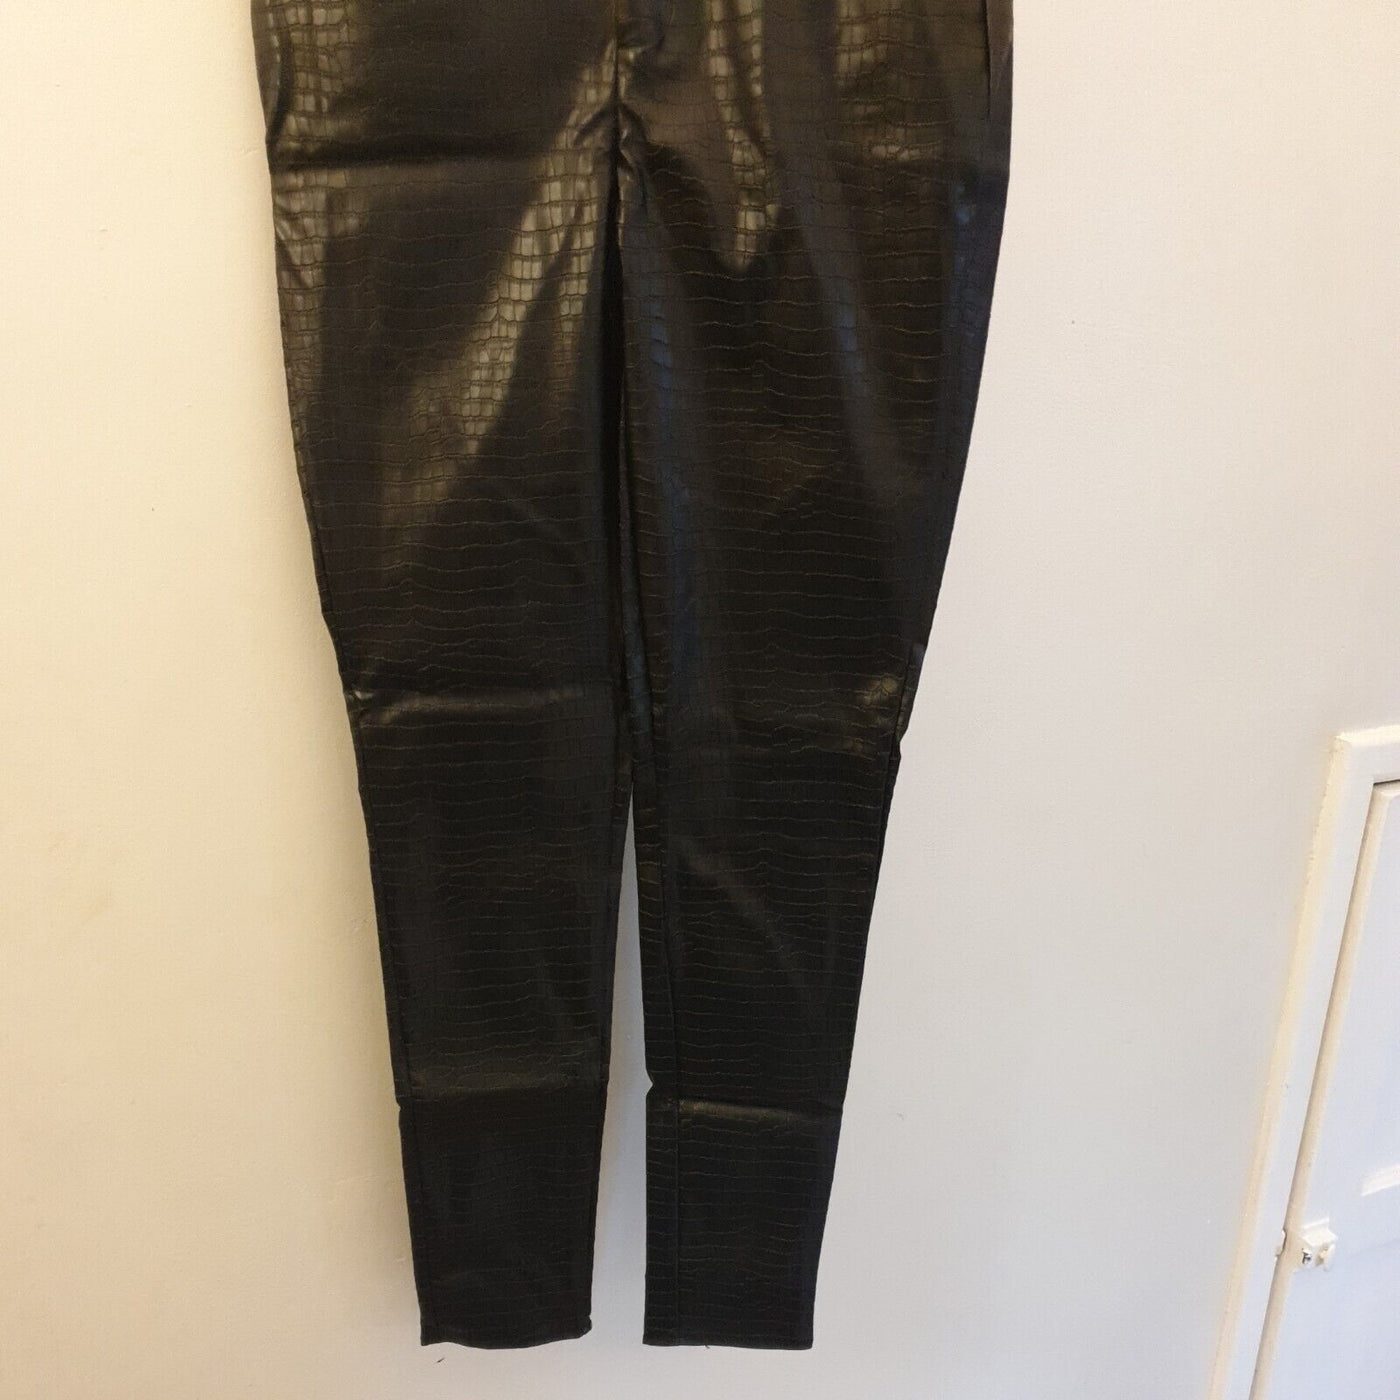 Missguided Black croc Faux Leather Trousers Uk6 High Waisted****Ref V6